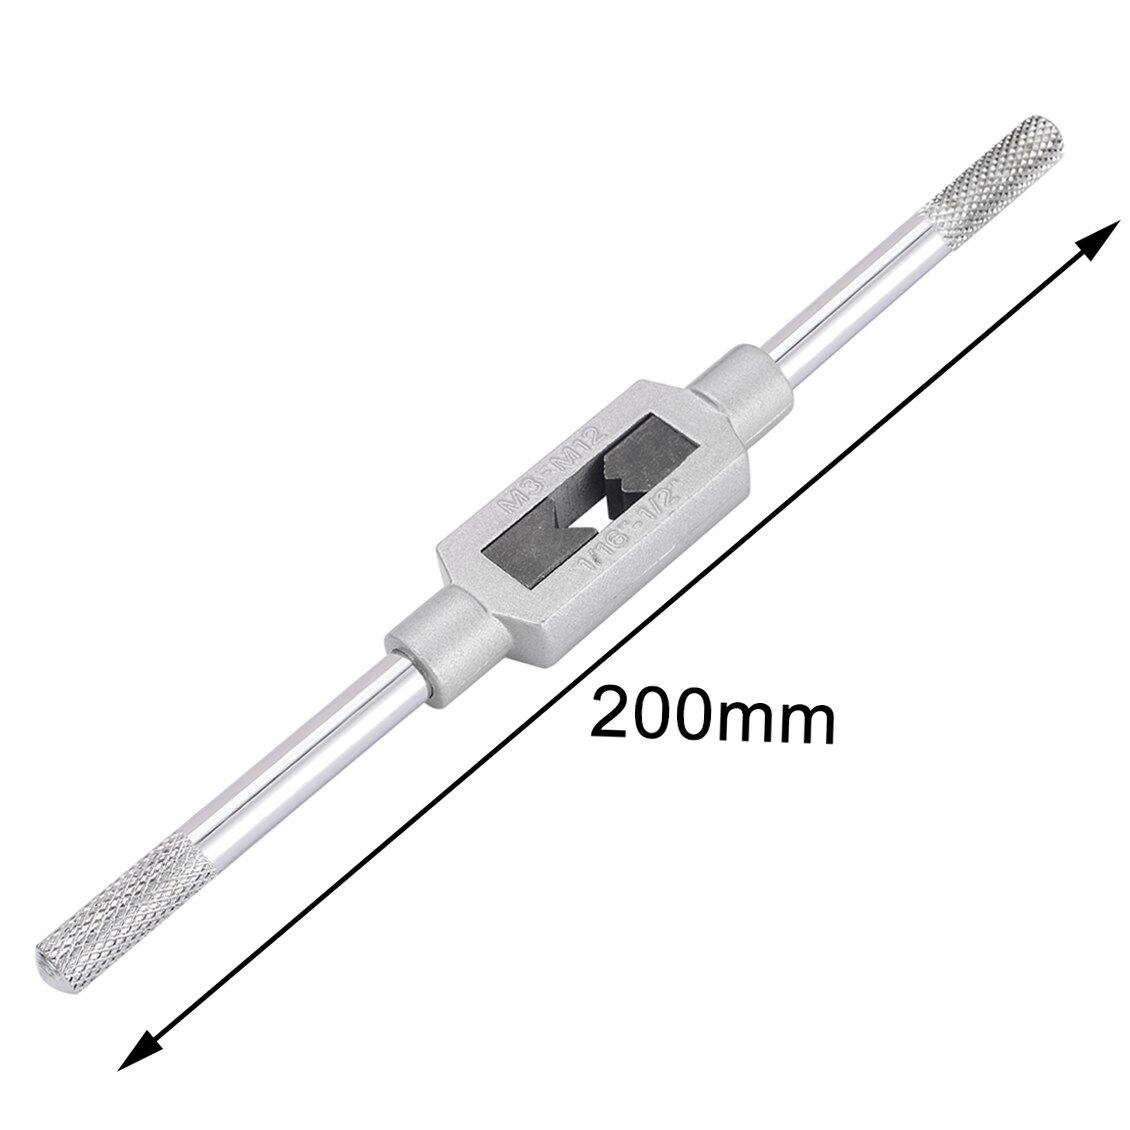 1pc M3-M12 1/16" to 1/2" Adjustable Engineers Tap Hinge Straight Tap Wrench Holder Threading Tool